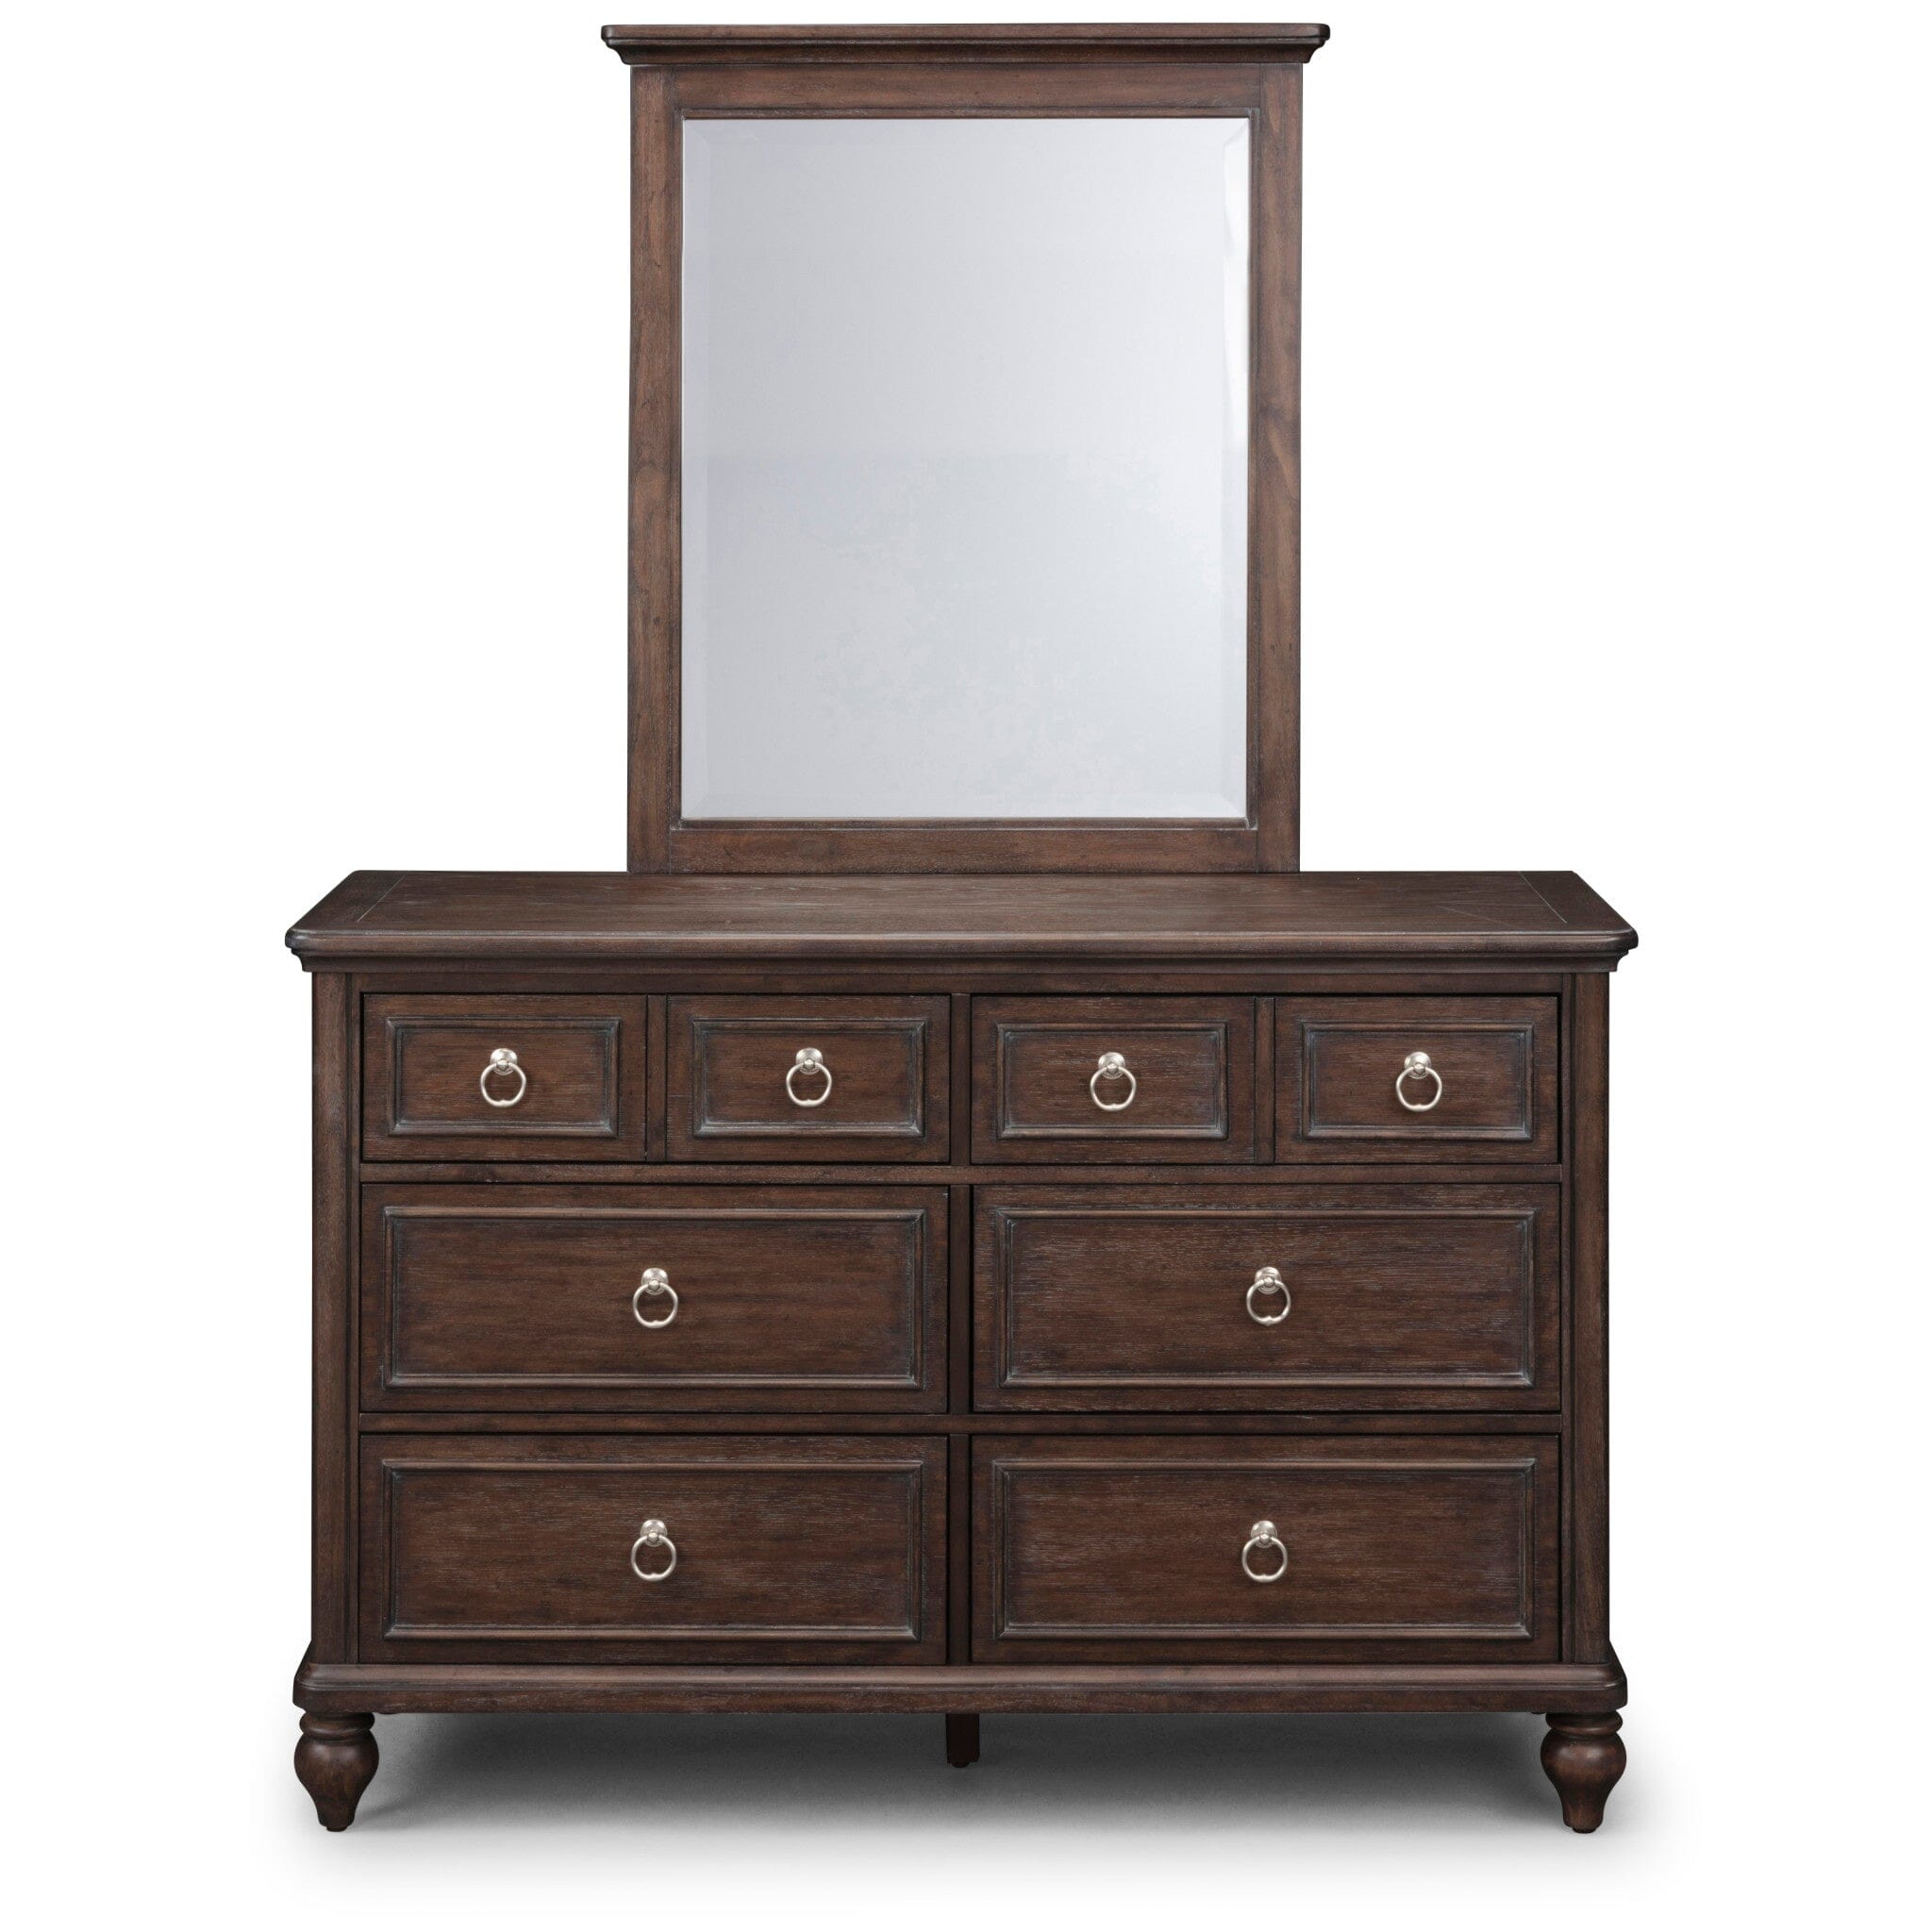 Coastal Dresser with Mirror By Southport Dresser Southport